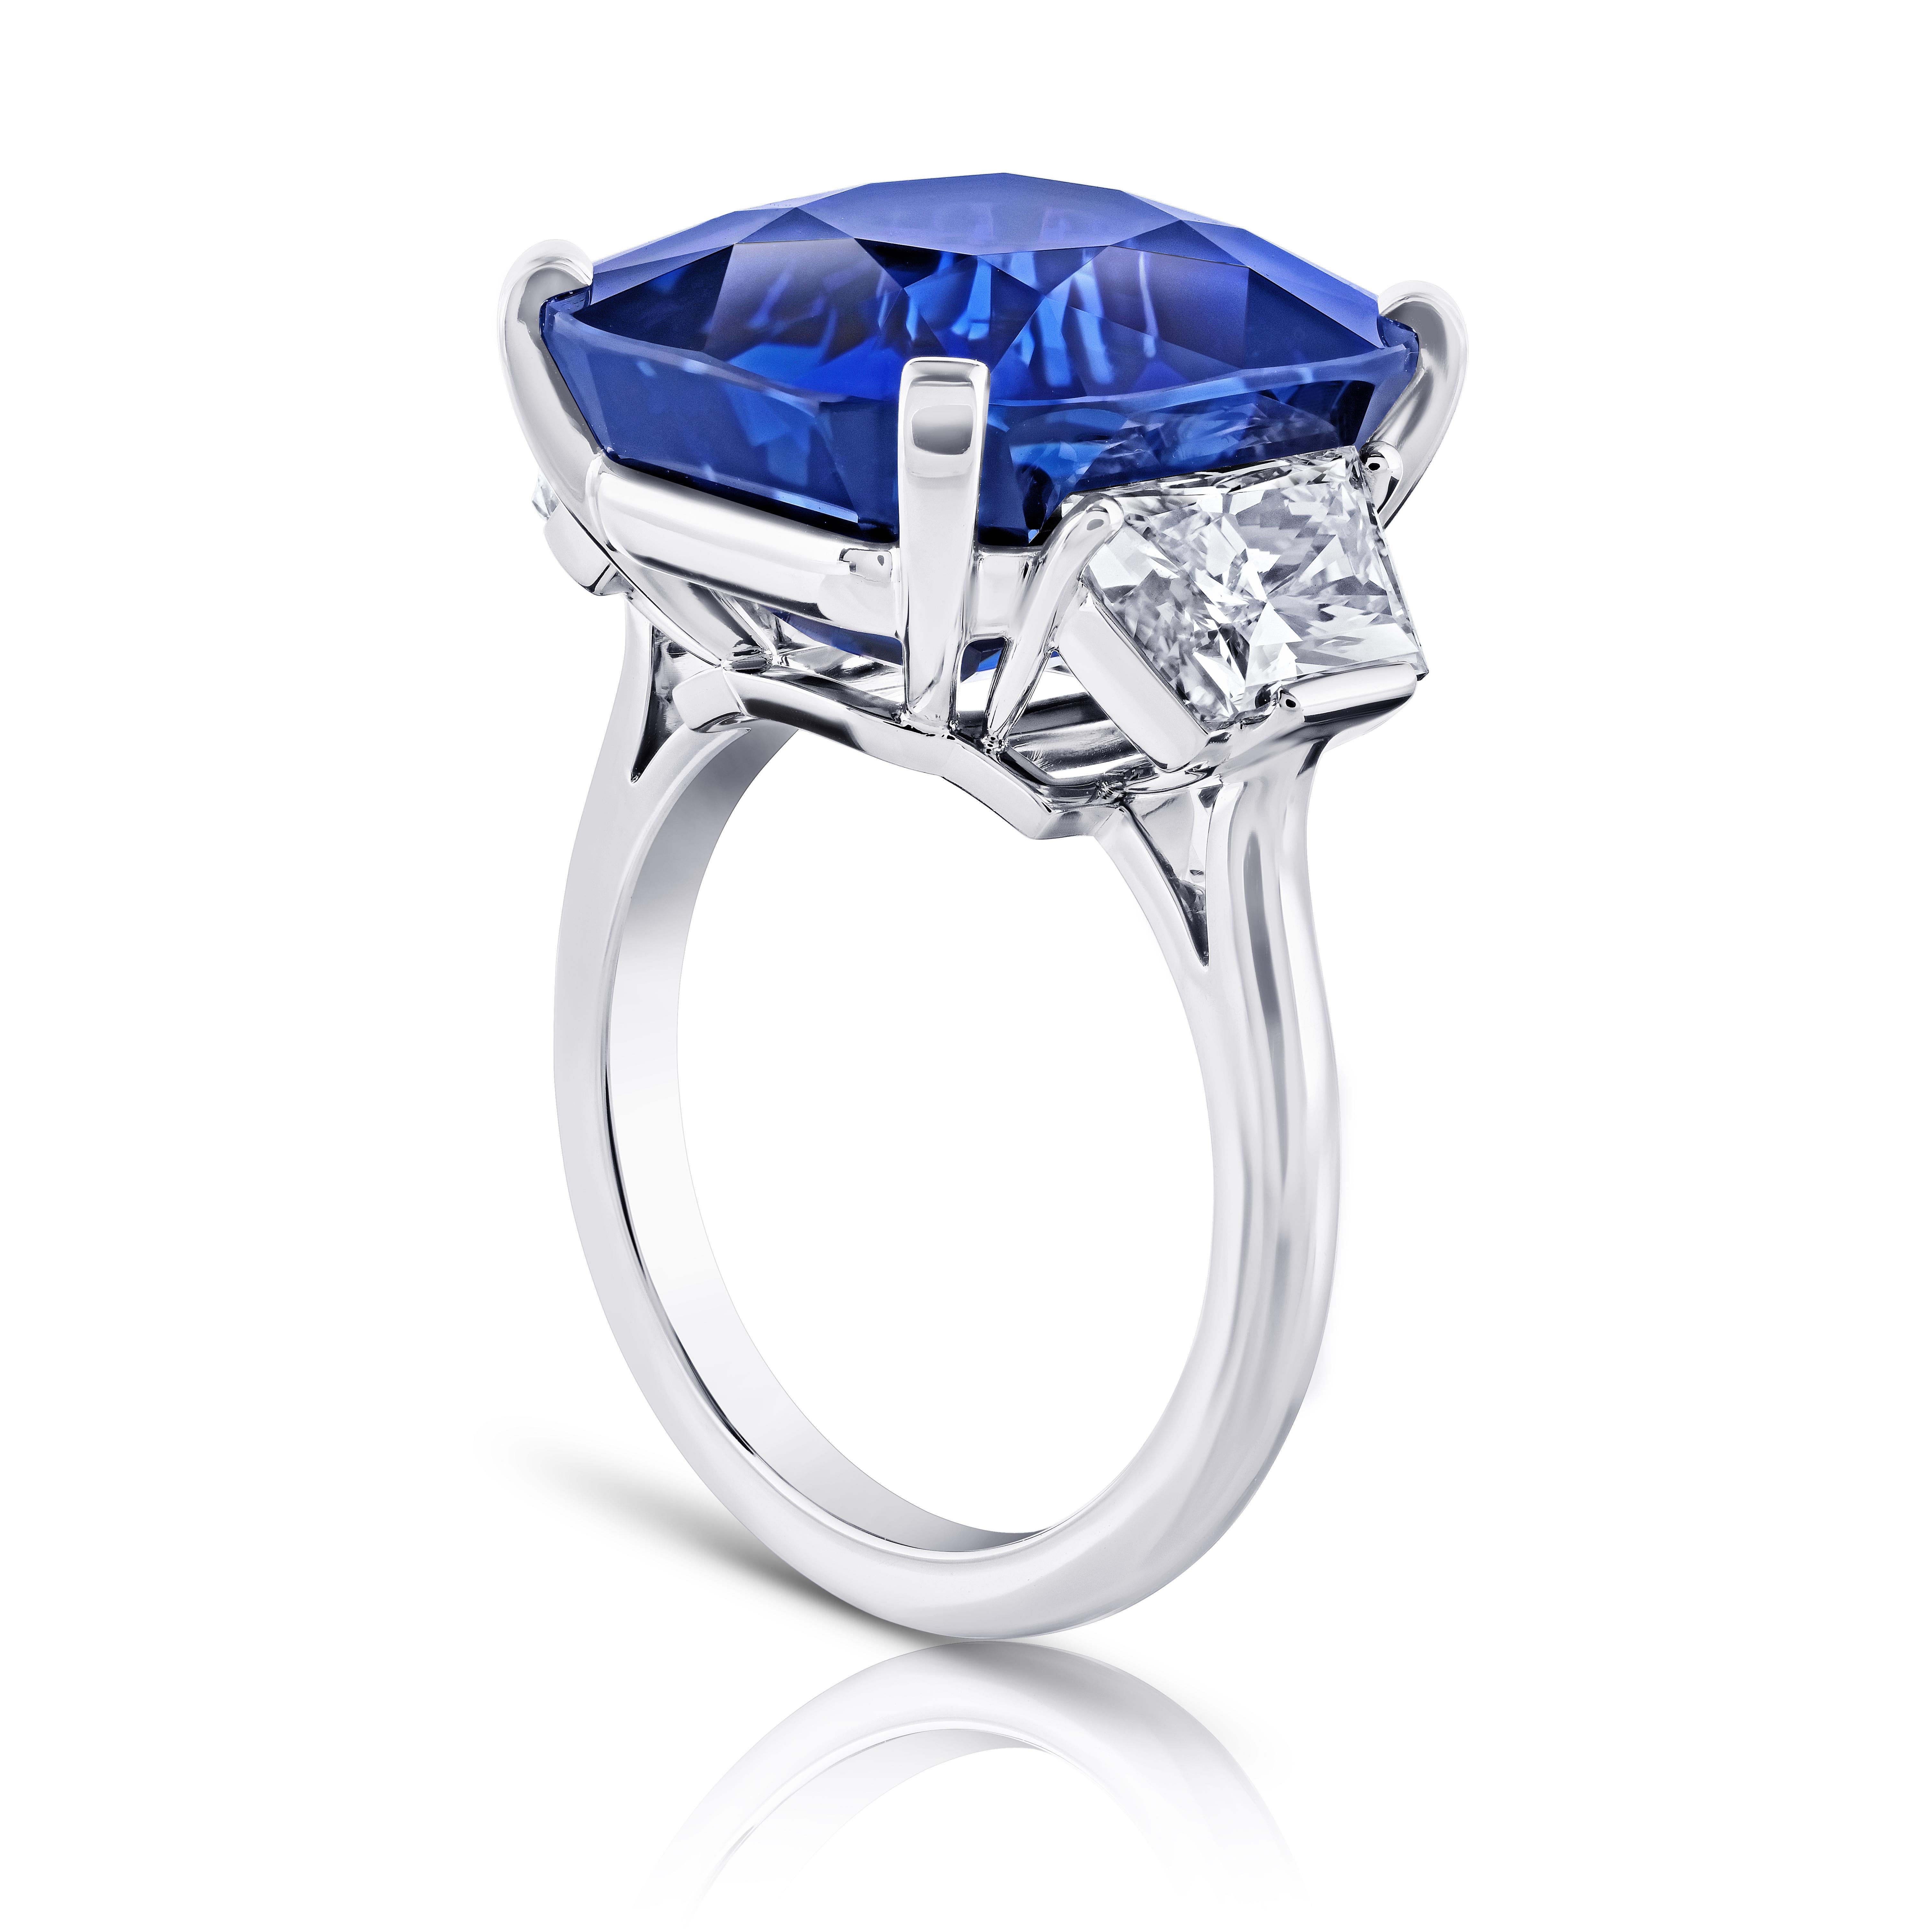 20.26 carat Cushion Blue Sapphire with two Trapezoid Modified Brilliant Diamonds 2.41 carats set in a handmade Platinum ring